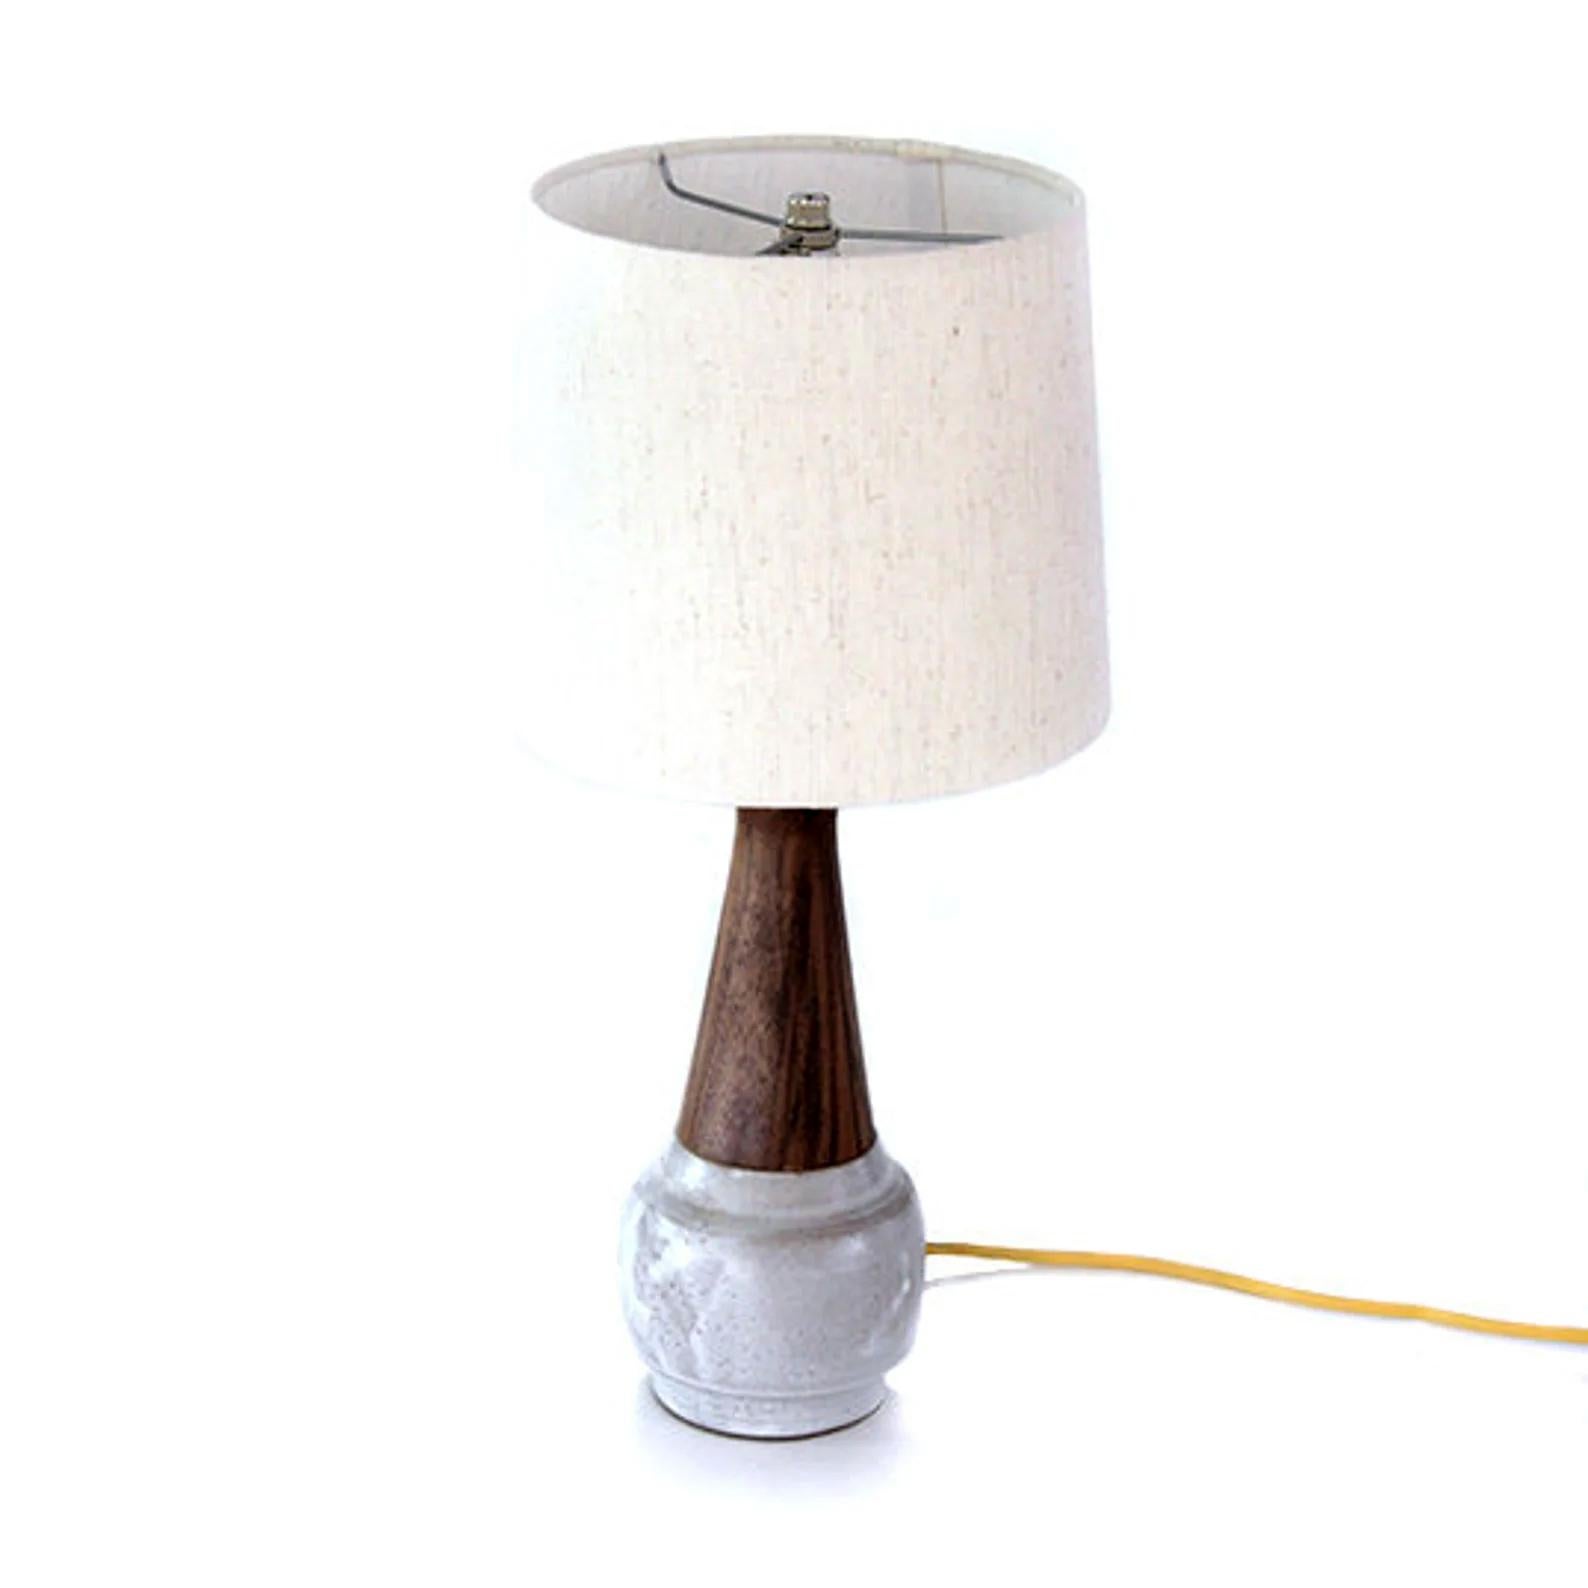 Vintage Mid-Century Modern Inspired Ceramic Wood Table Lamp, Stoneware Walnut In New Condition For Sale In Long Beach, CA